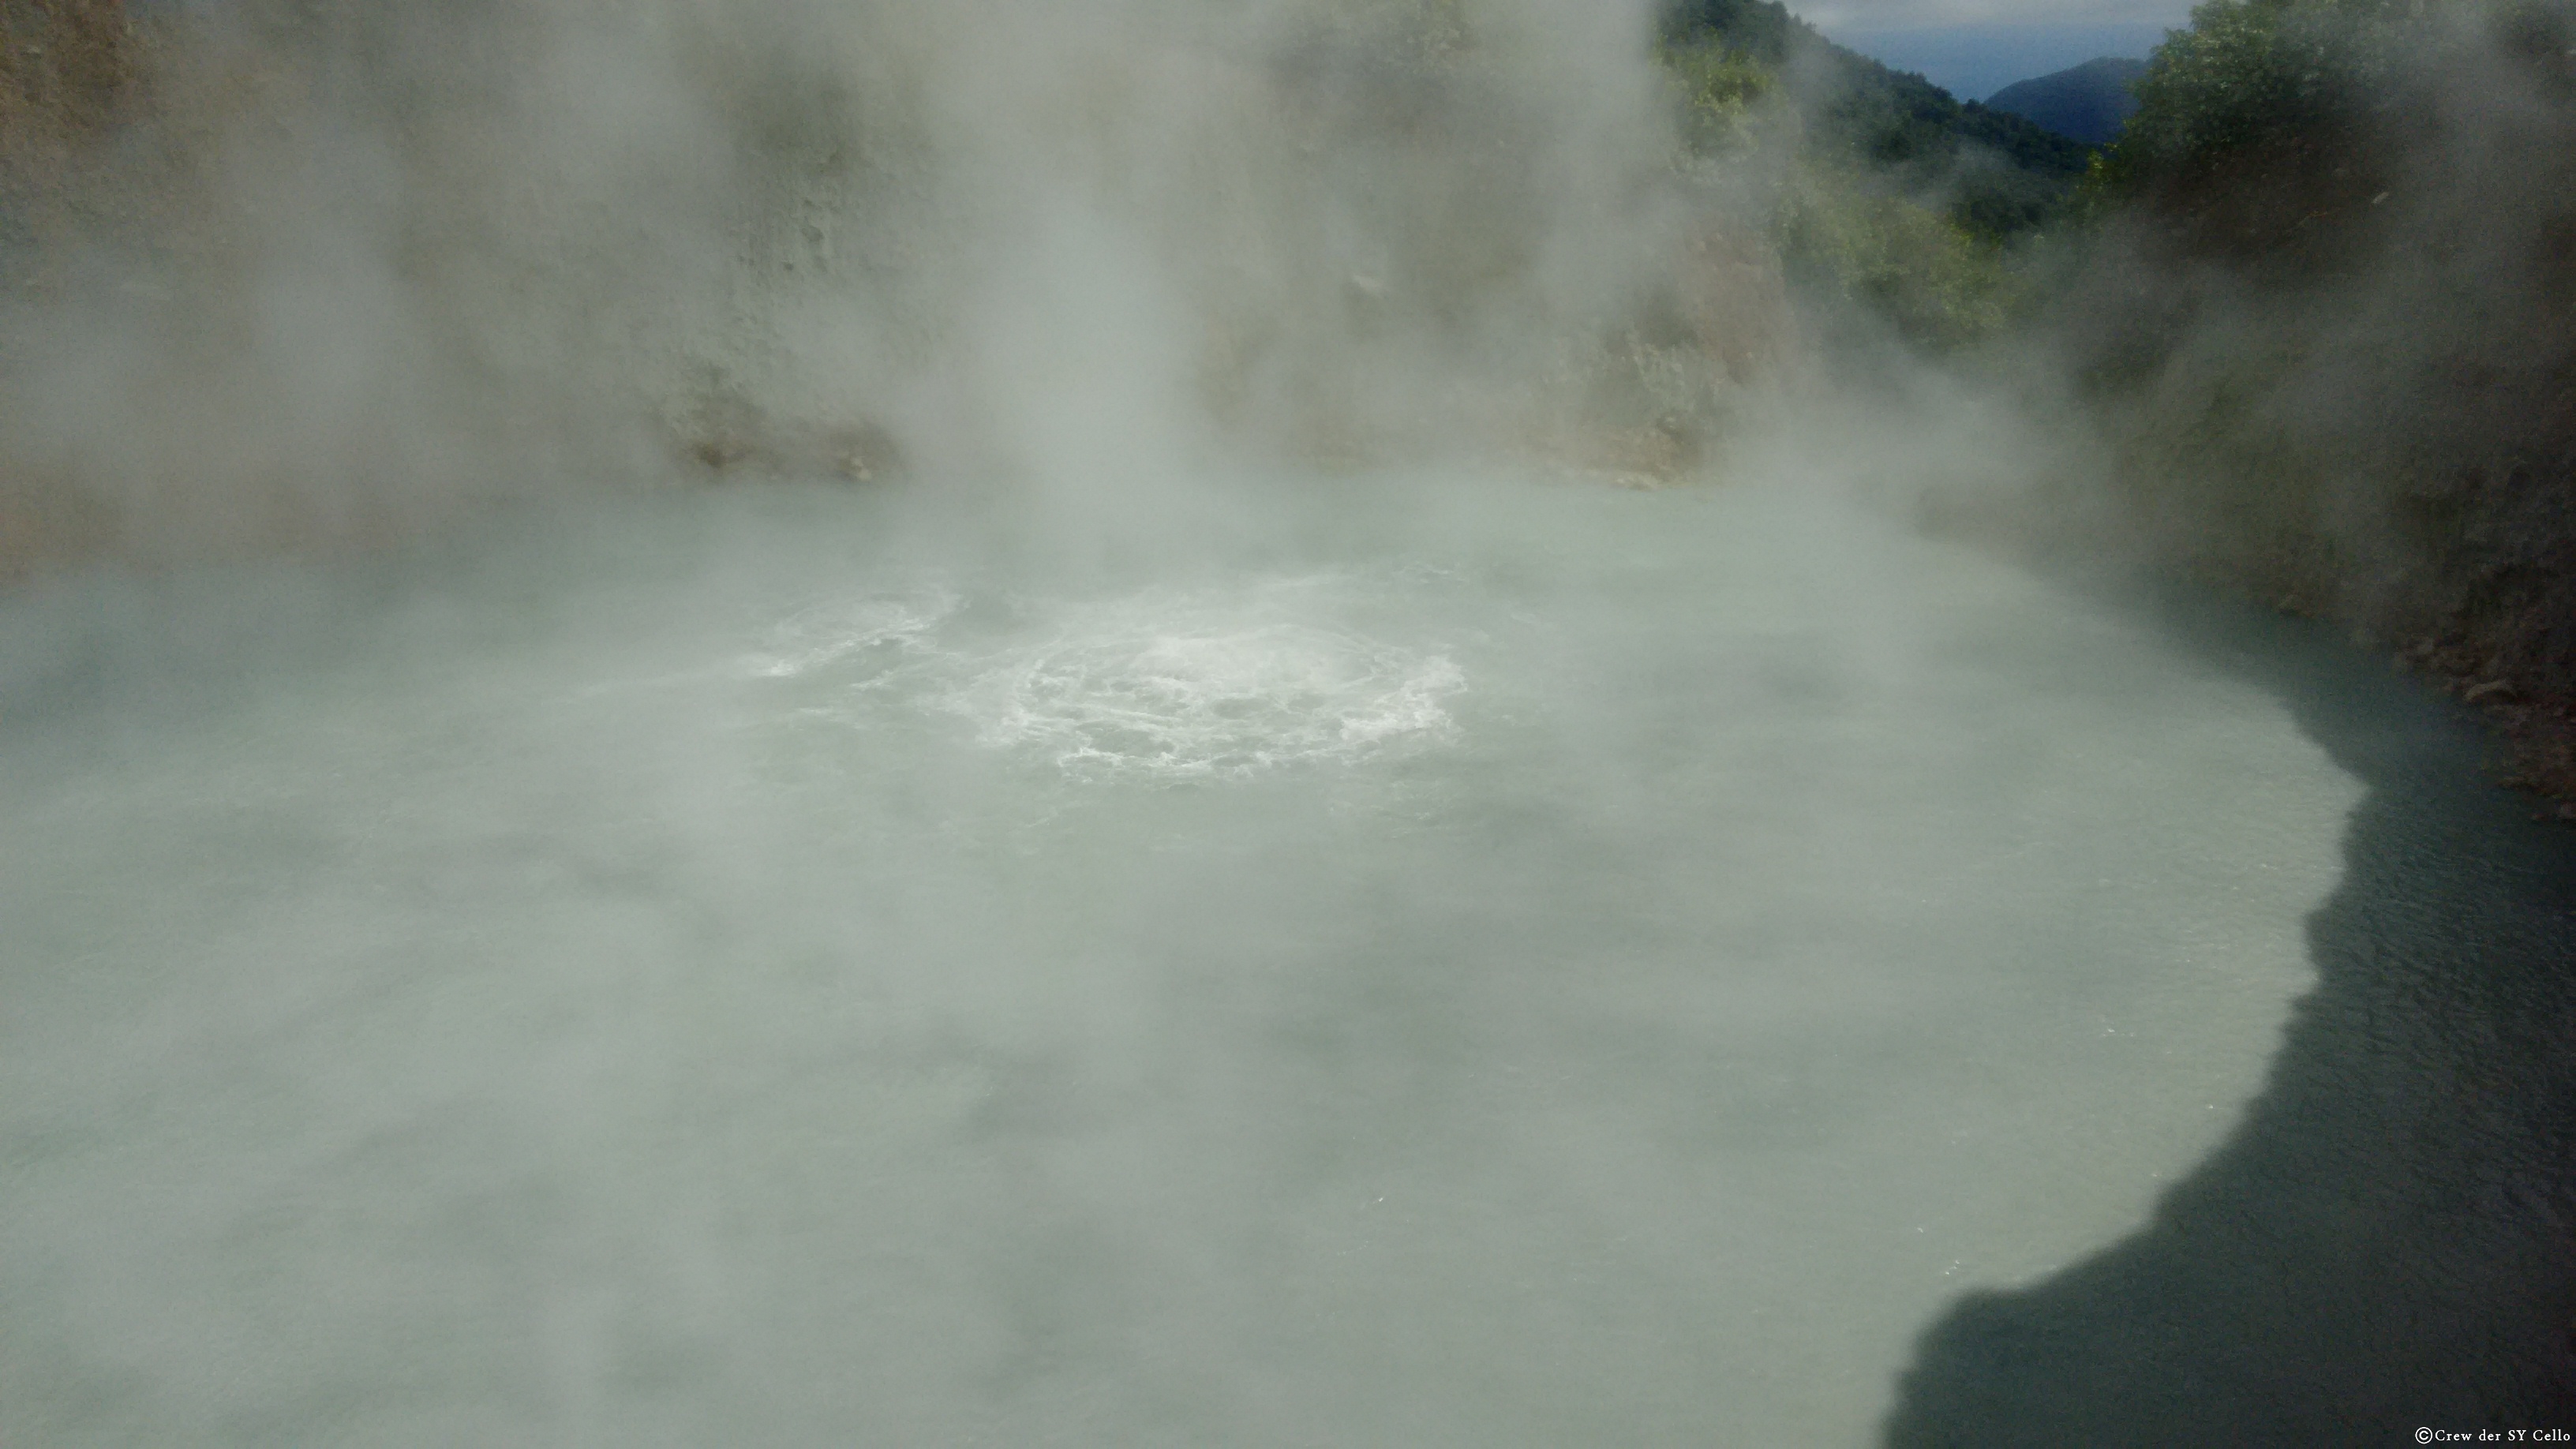 &lsquo;Boiling Lake&rsquo;, der &lsquo;kochende See&rsquo;.